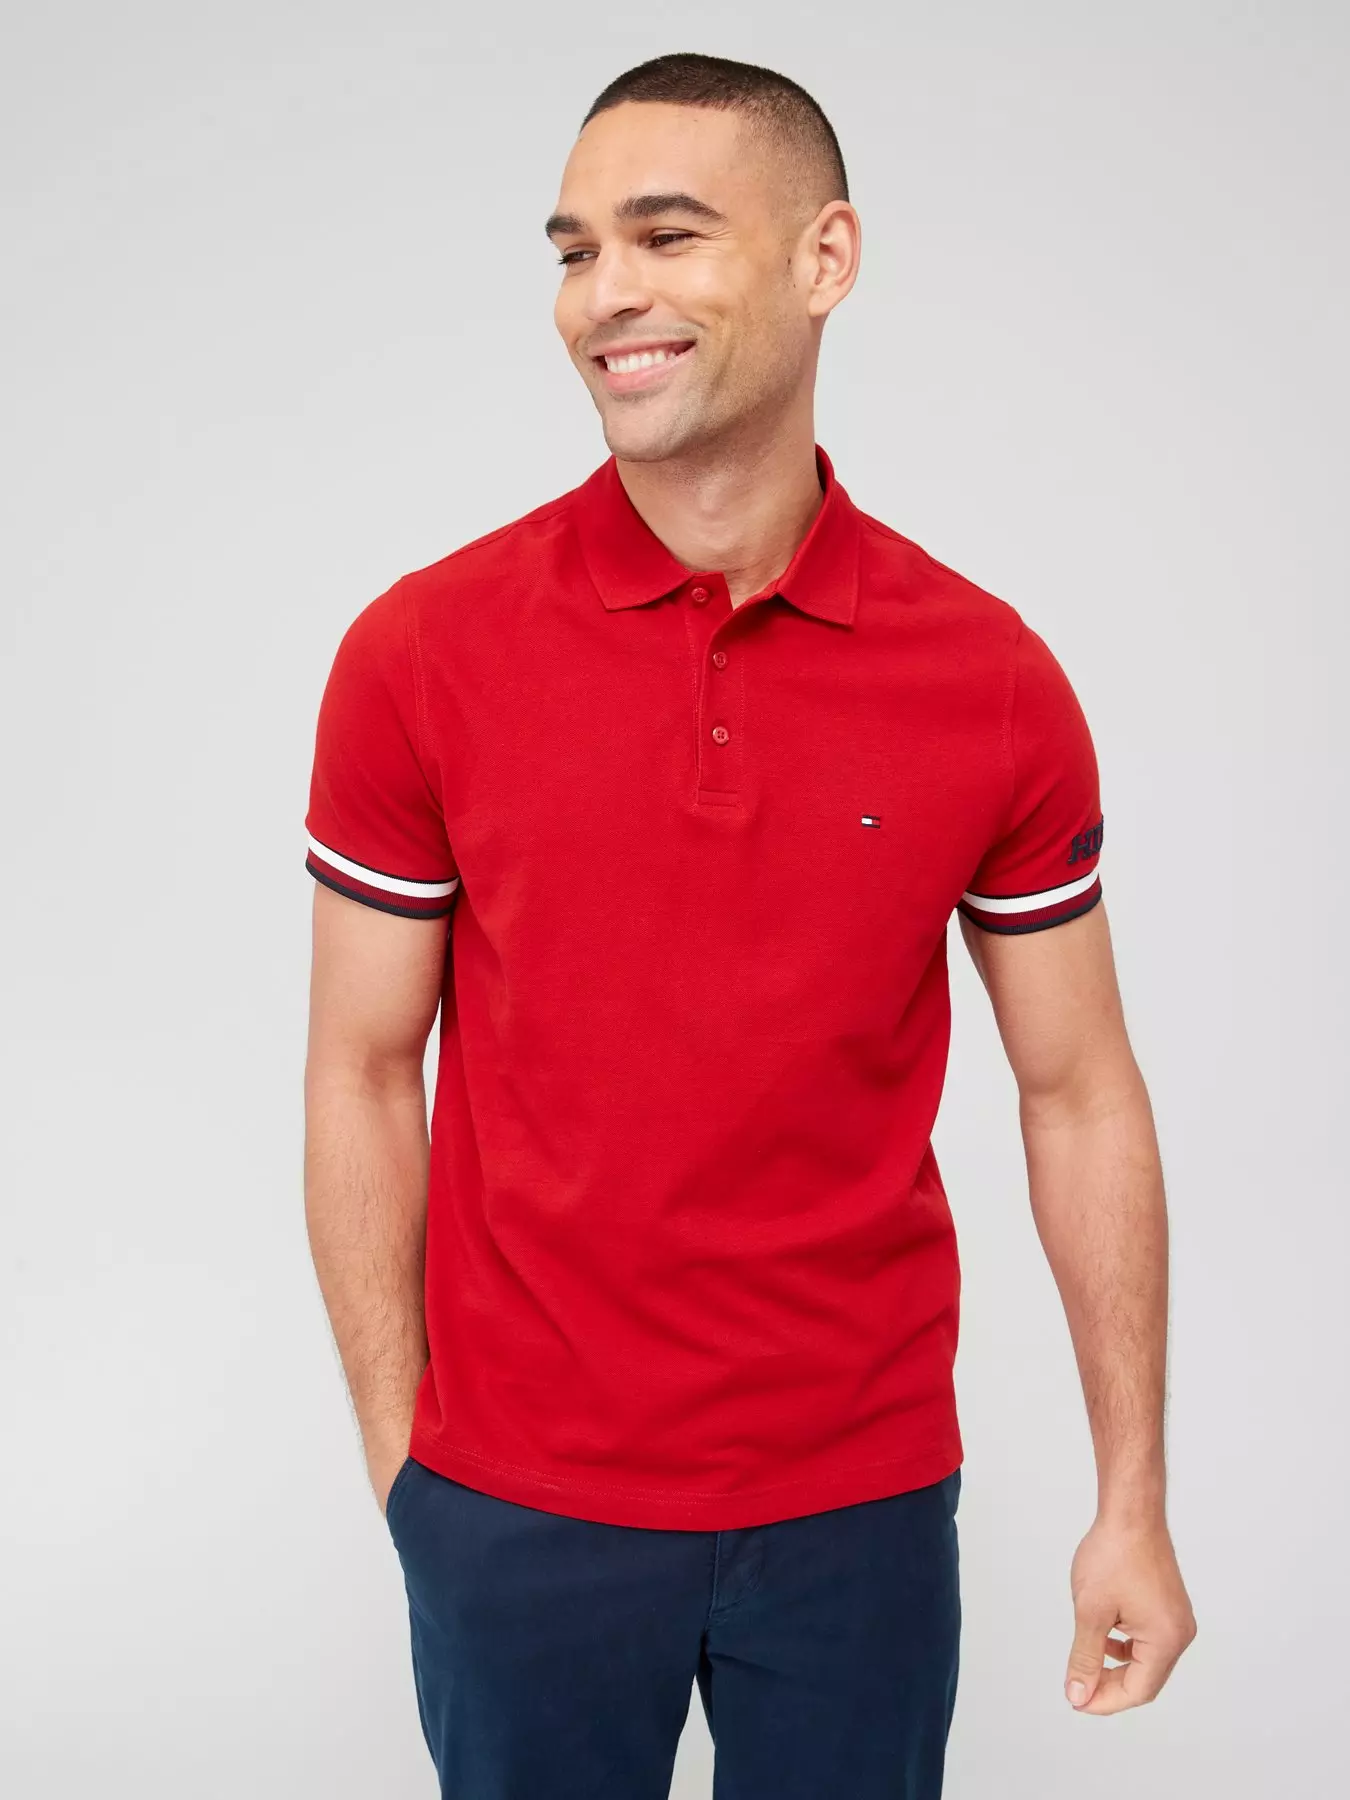 Main Collection Ireland Tommy Very | | & hilfiger | | Men polos T-shirts